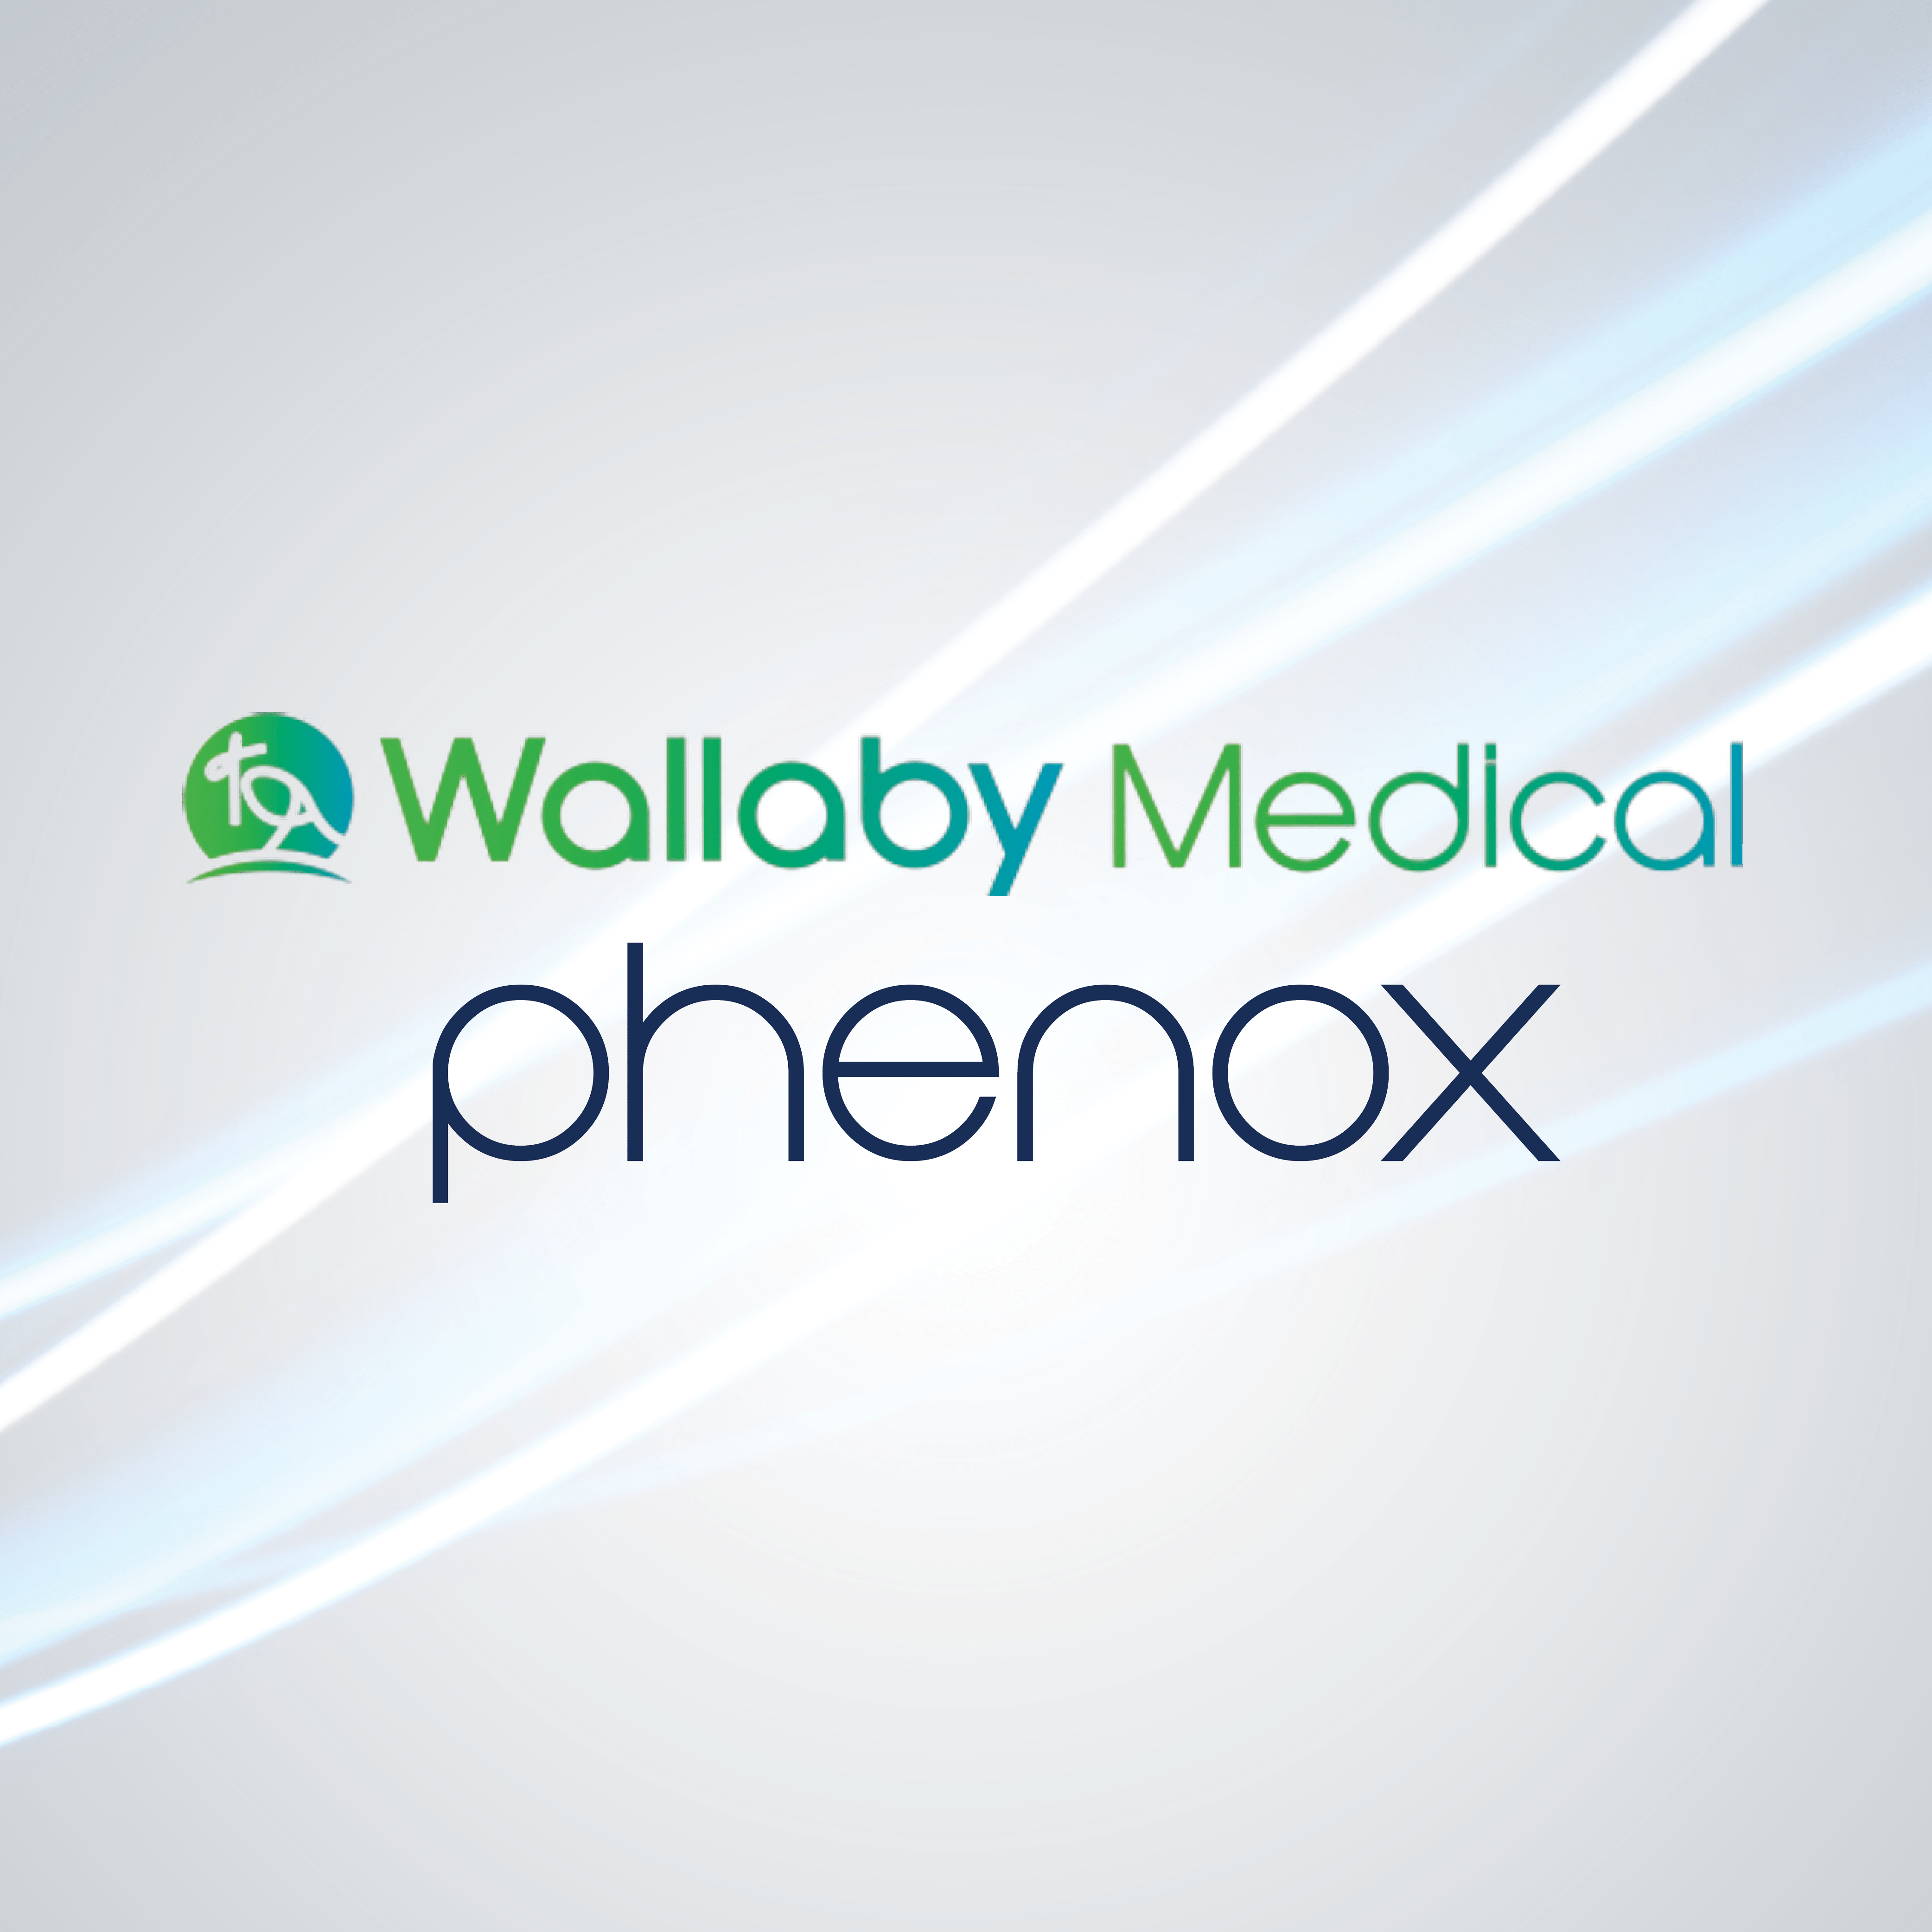 Wallaby Expands Distribution Agreement With Japan Lifeline For Neurovascular Products for the Japan Market